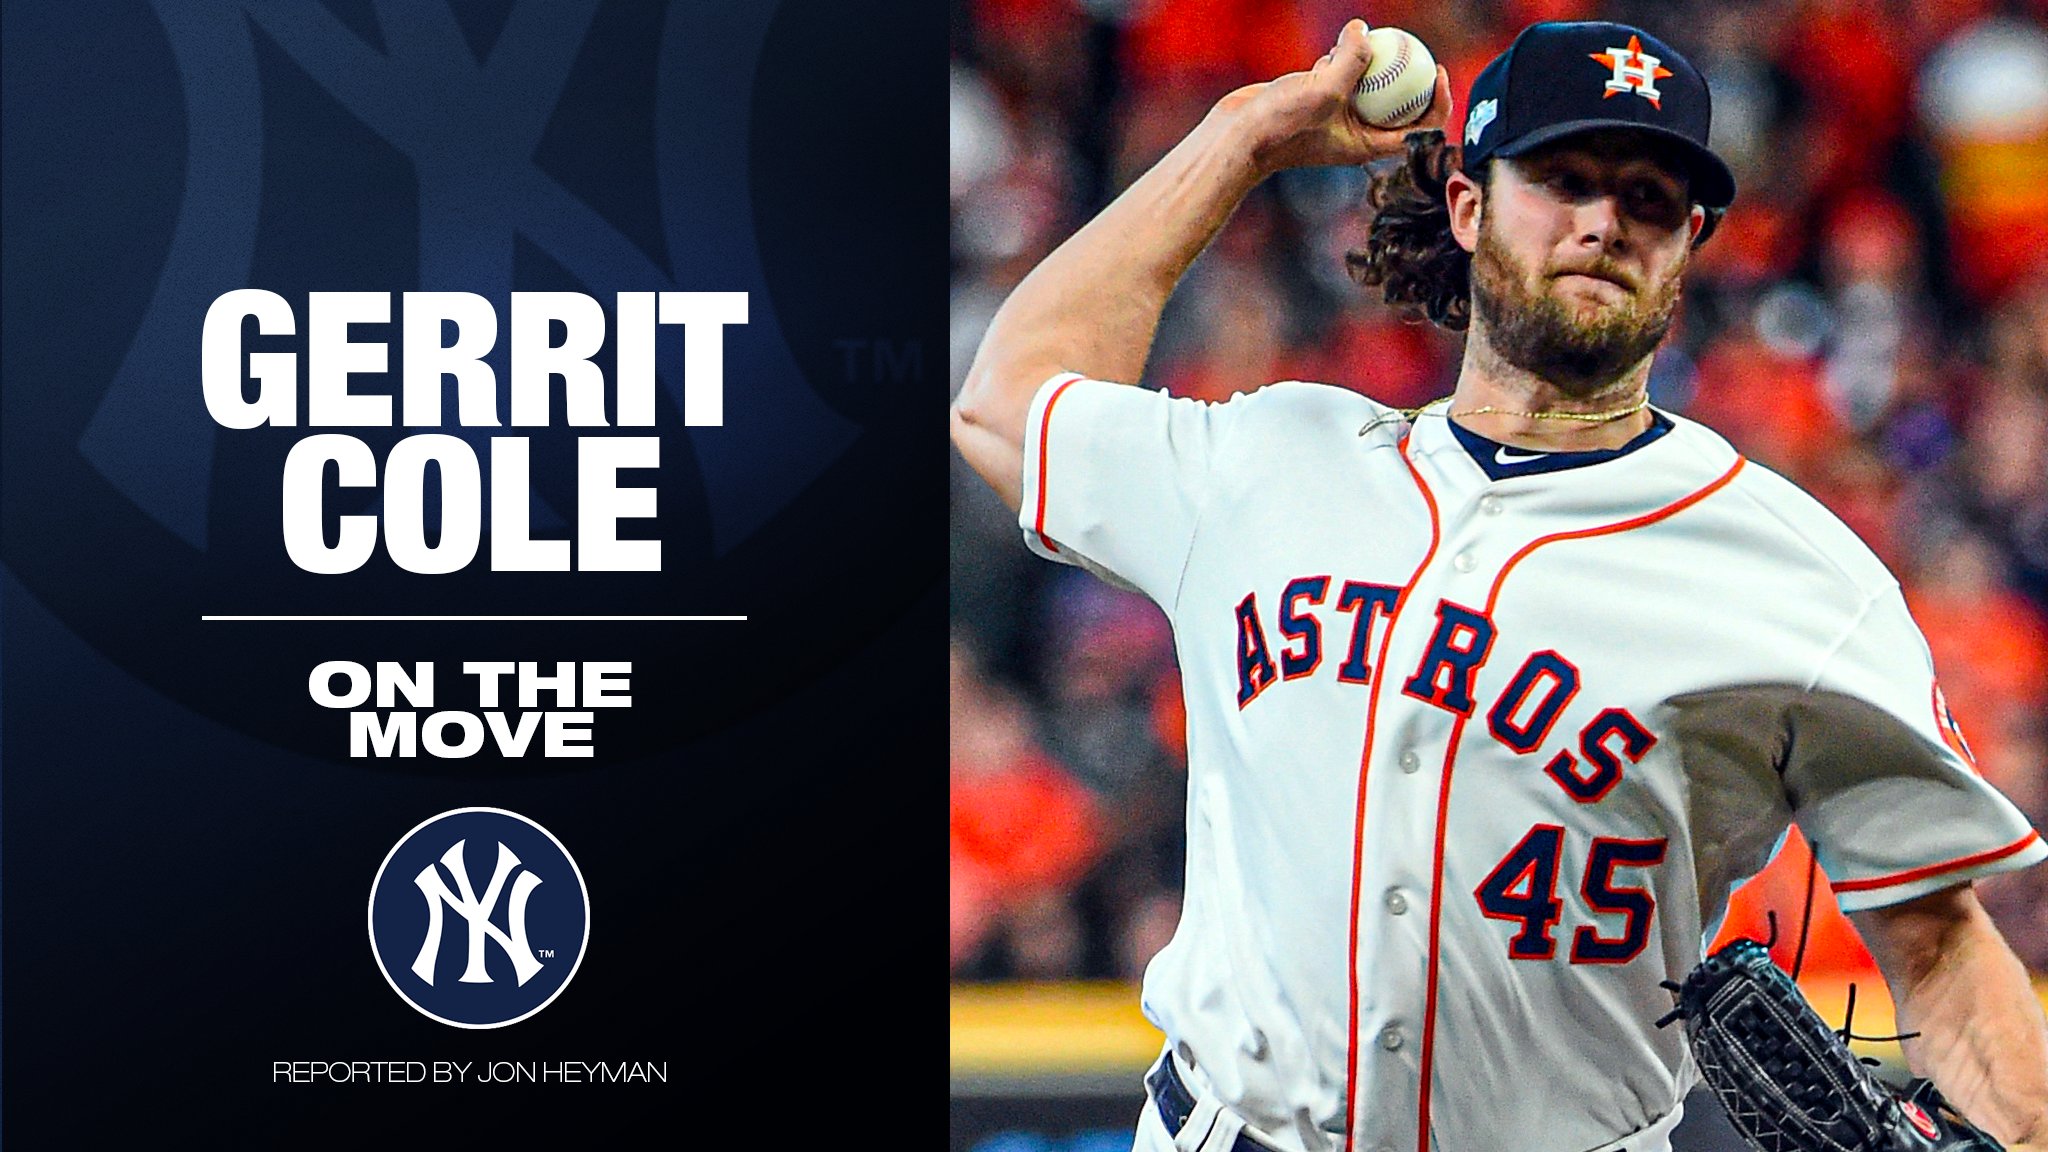 MLB on X: The Yankees get their man! Gerrit Cole will reportedly